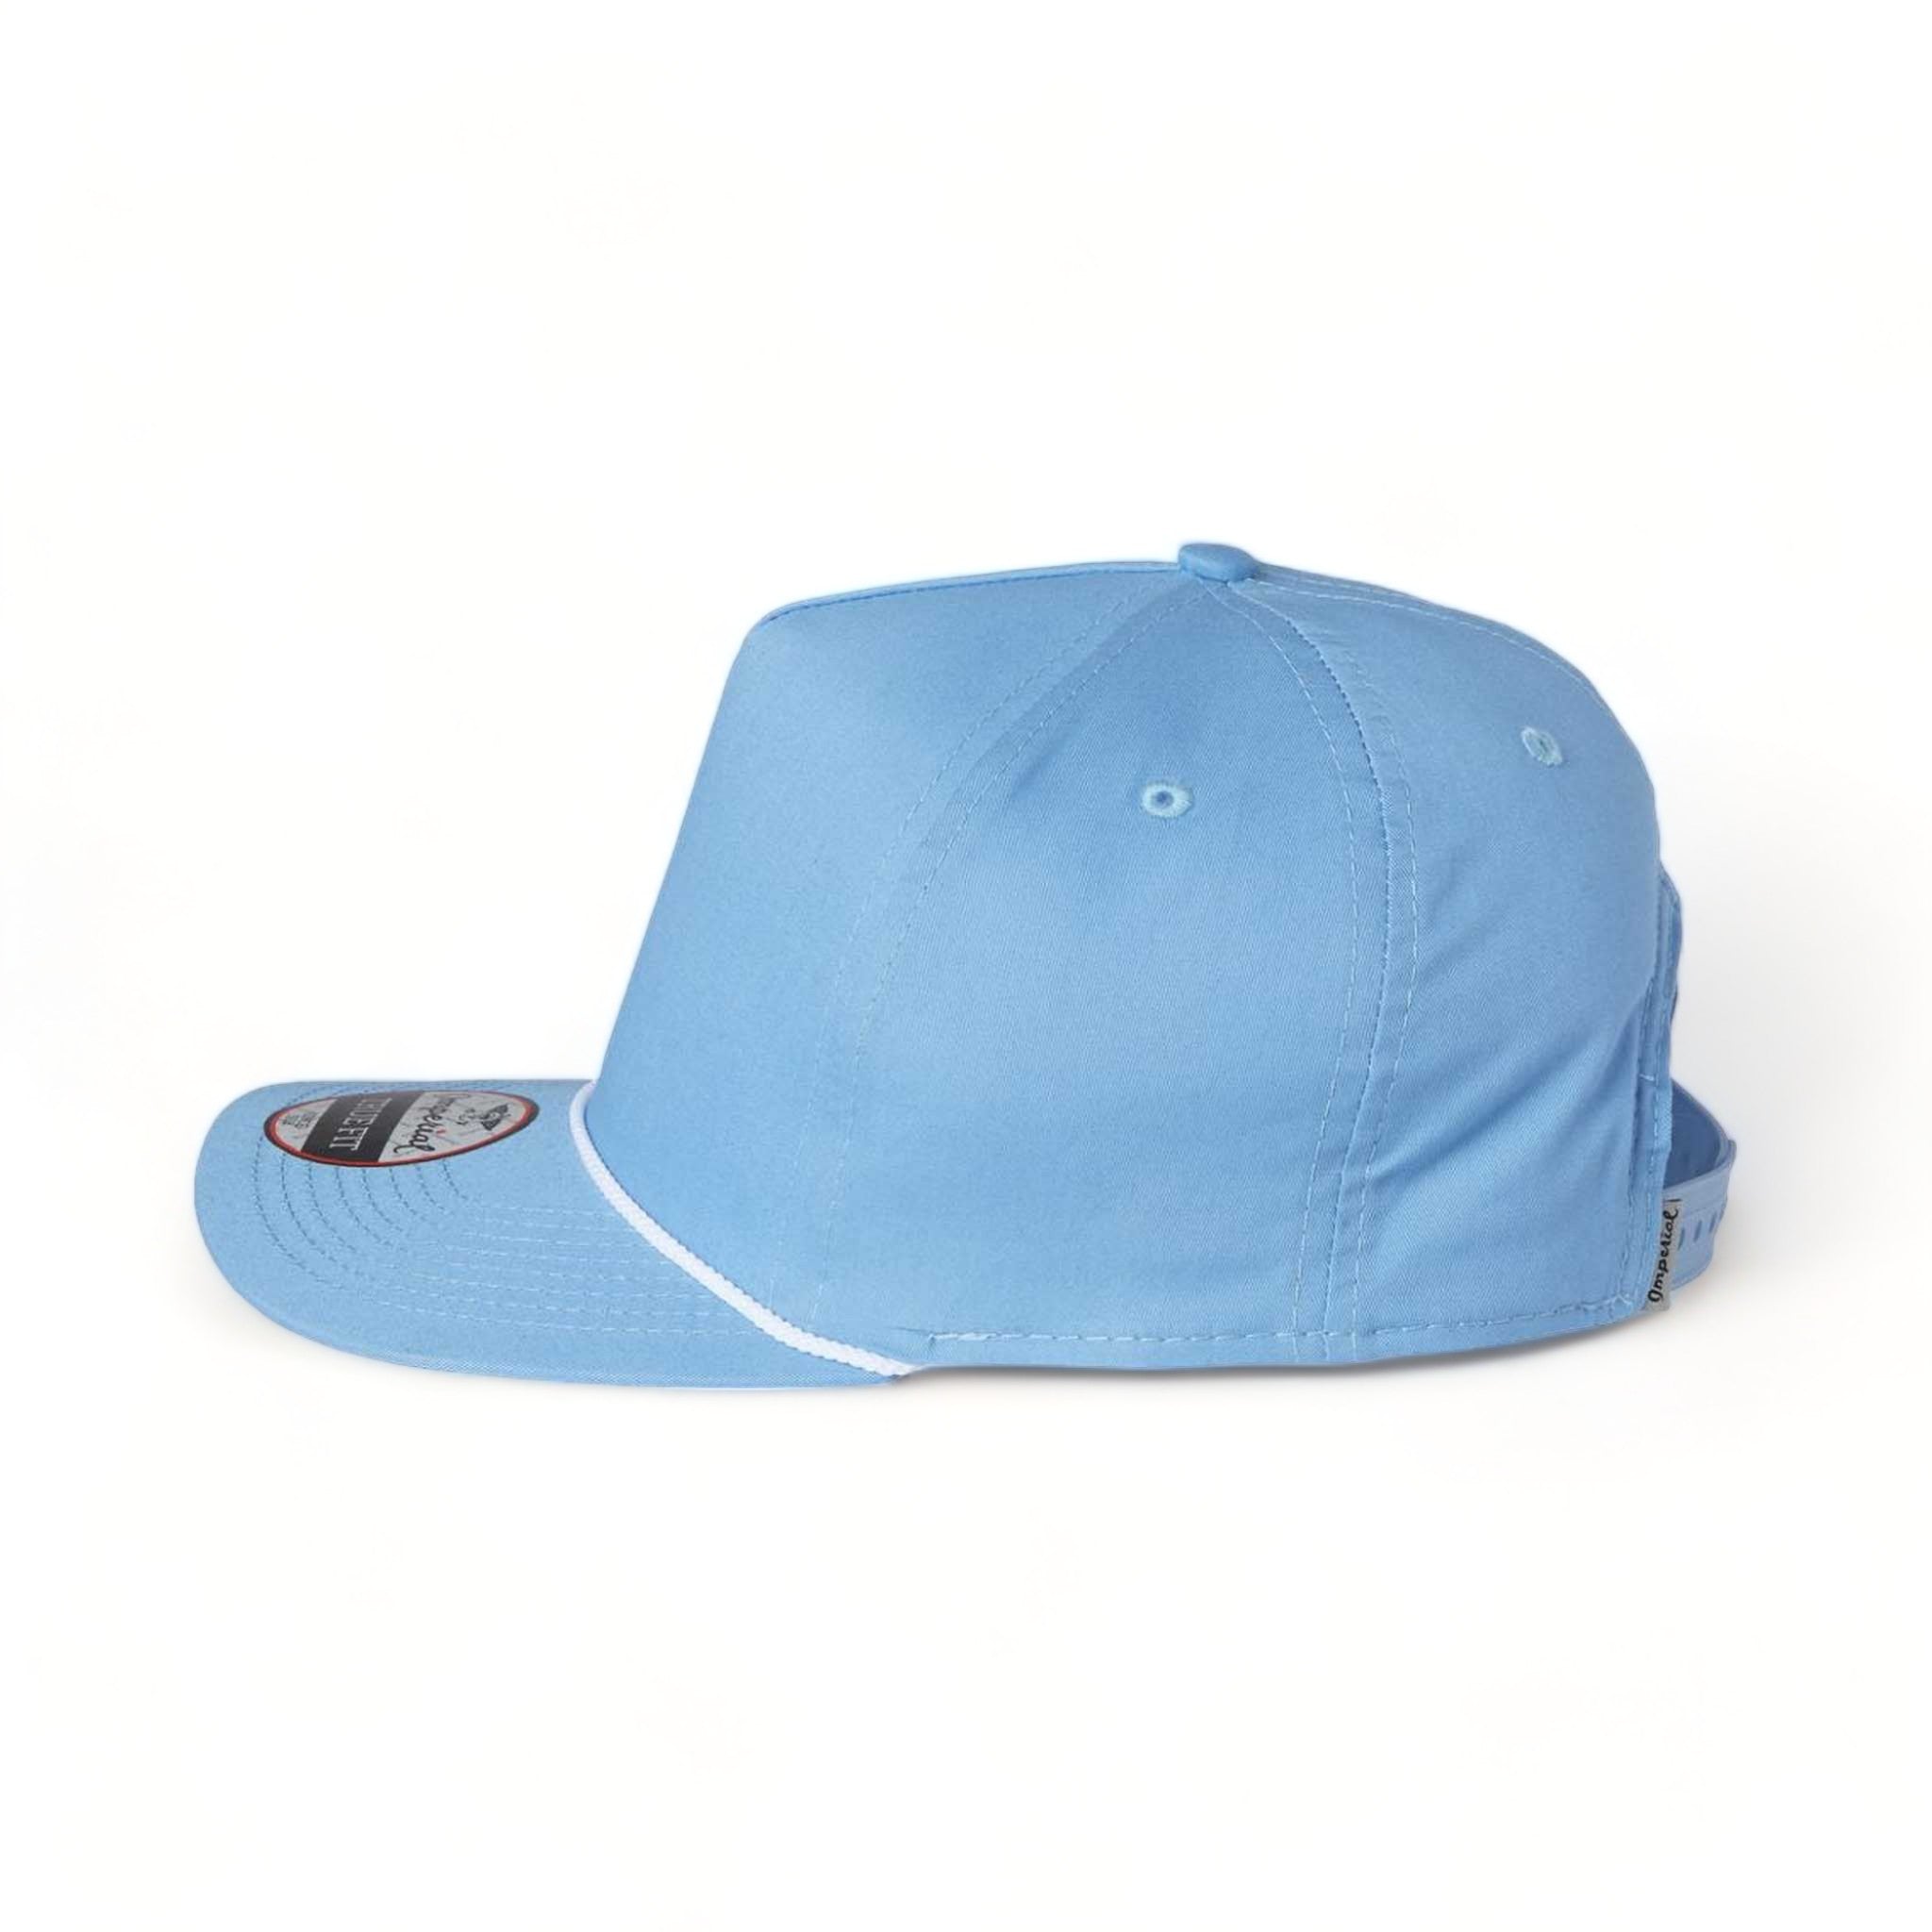 Side view of Imperial 5056 custom hat in powder blue and white